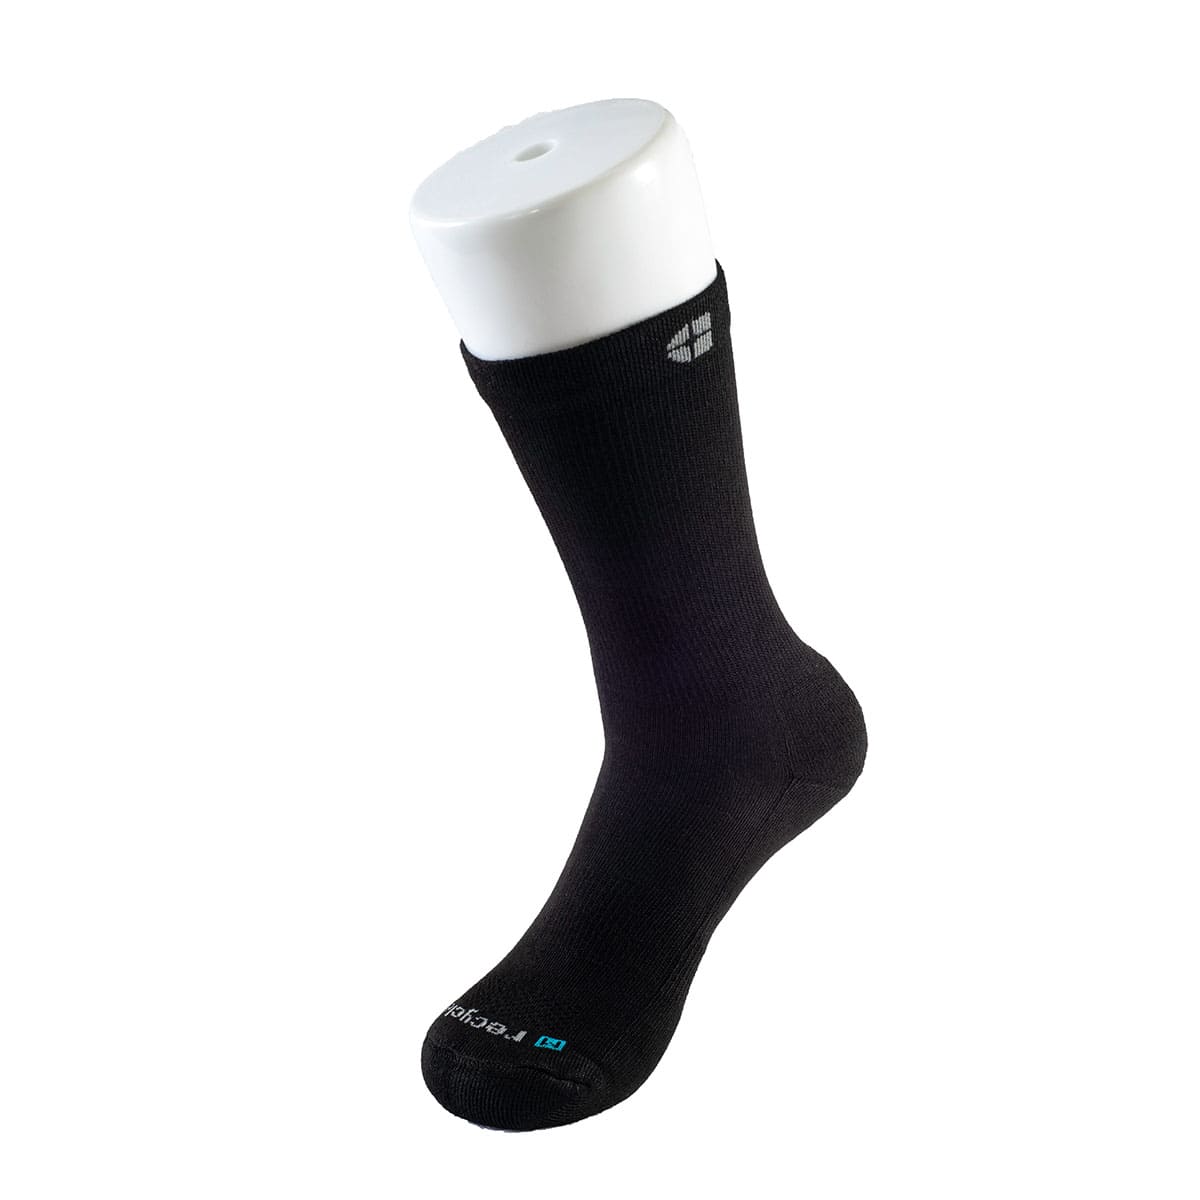 The crew sock recycled by Shoes For Crews, made from 100 per cent recycled polyester, offers extra comfort.The crew sock recycled by Shoes For Crews, made from 100 per cent recycled polyester, offers extra comfort.